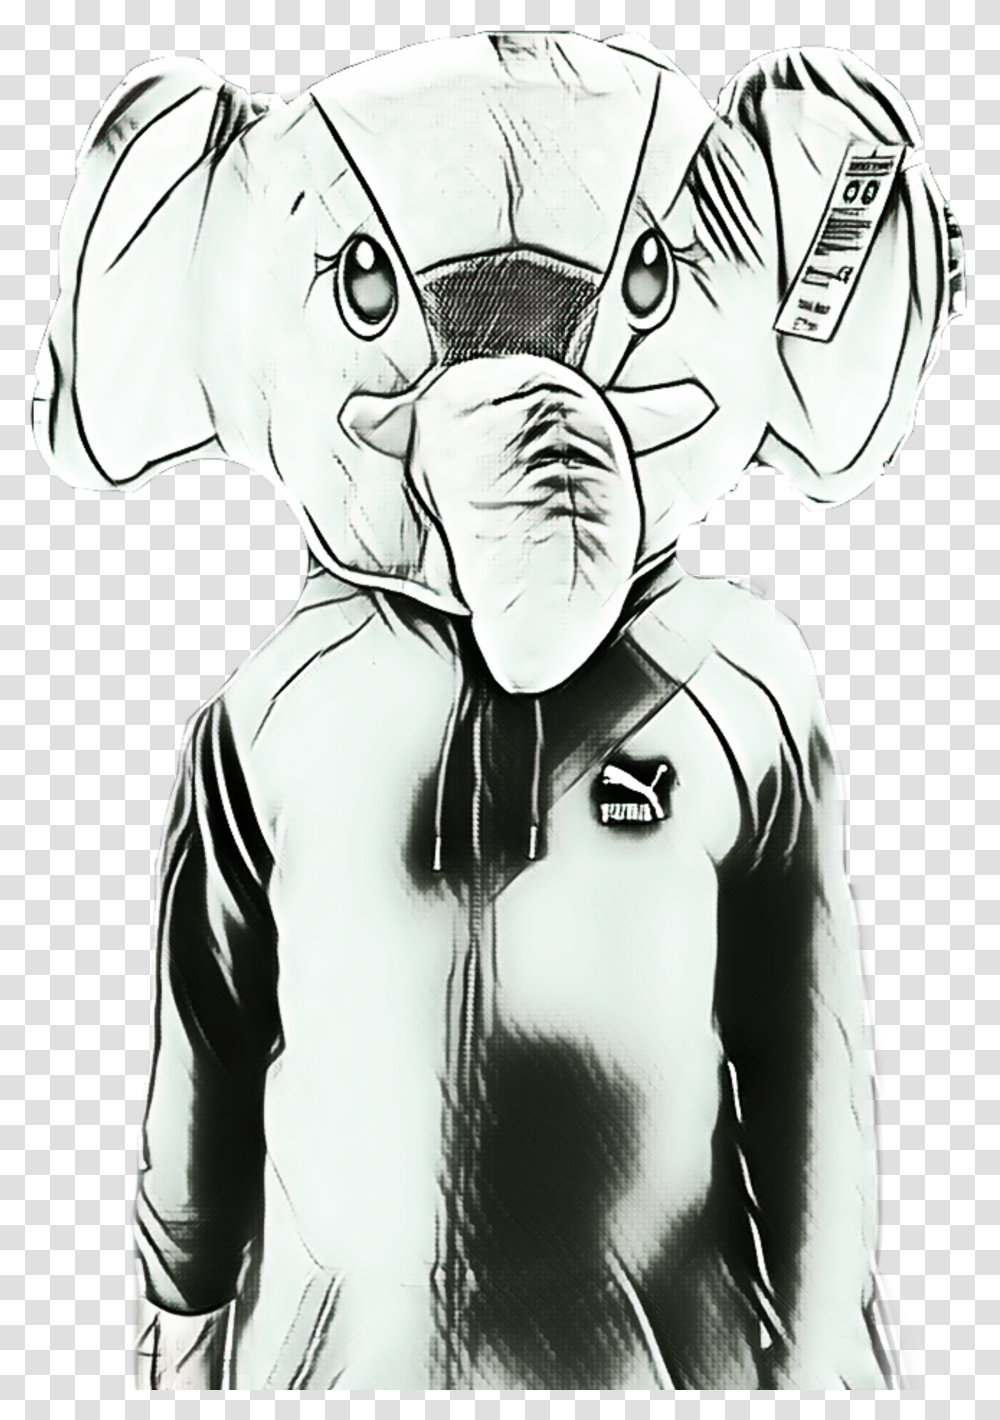 Thos Is My Dad In A Elephant Head Costume Illustration Transparent Png